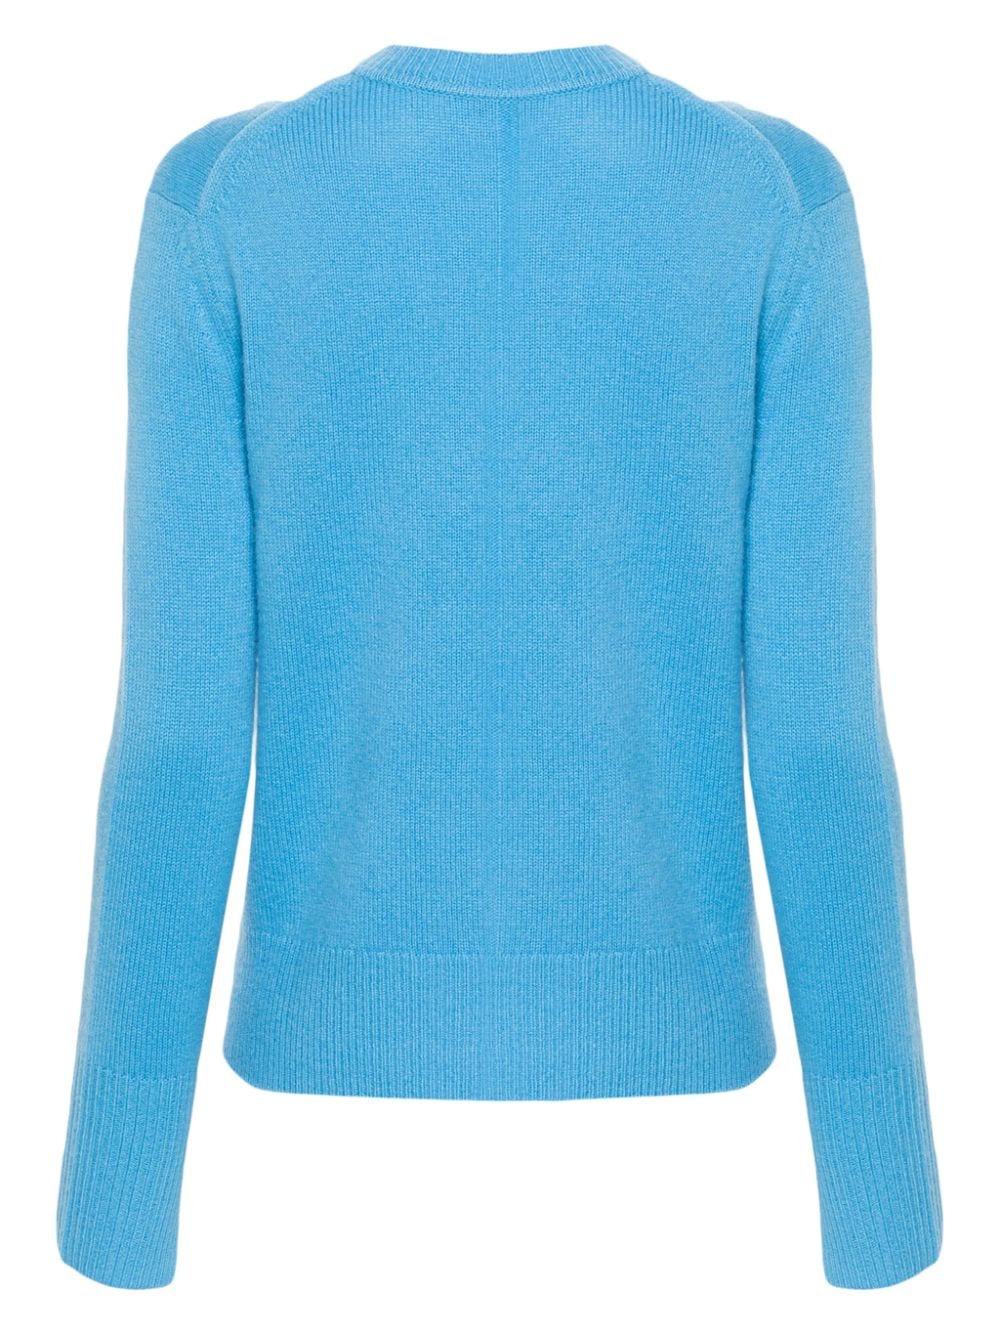 Image 2 of JOSEPH knitted cashmere jumper